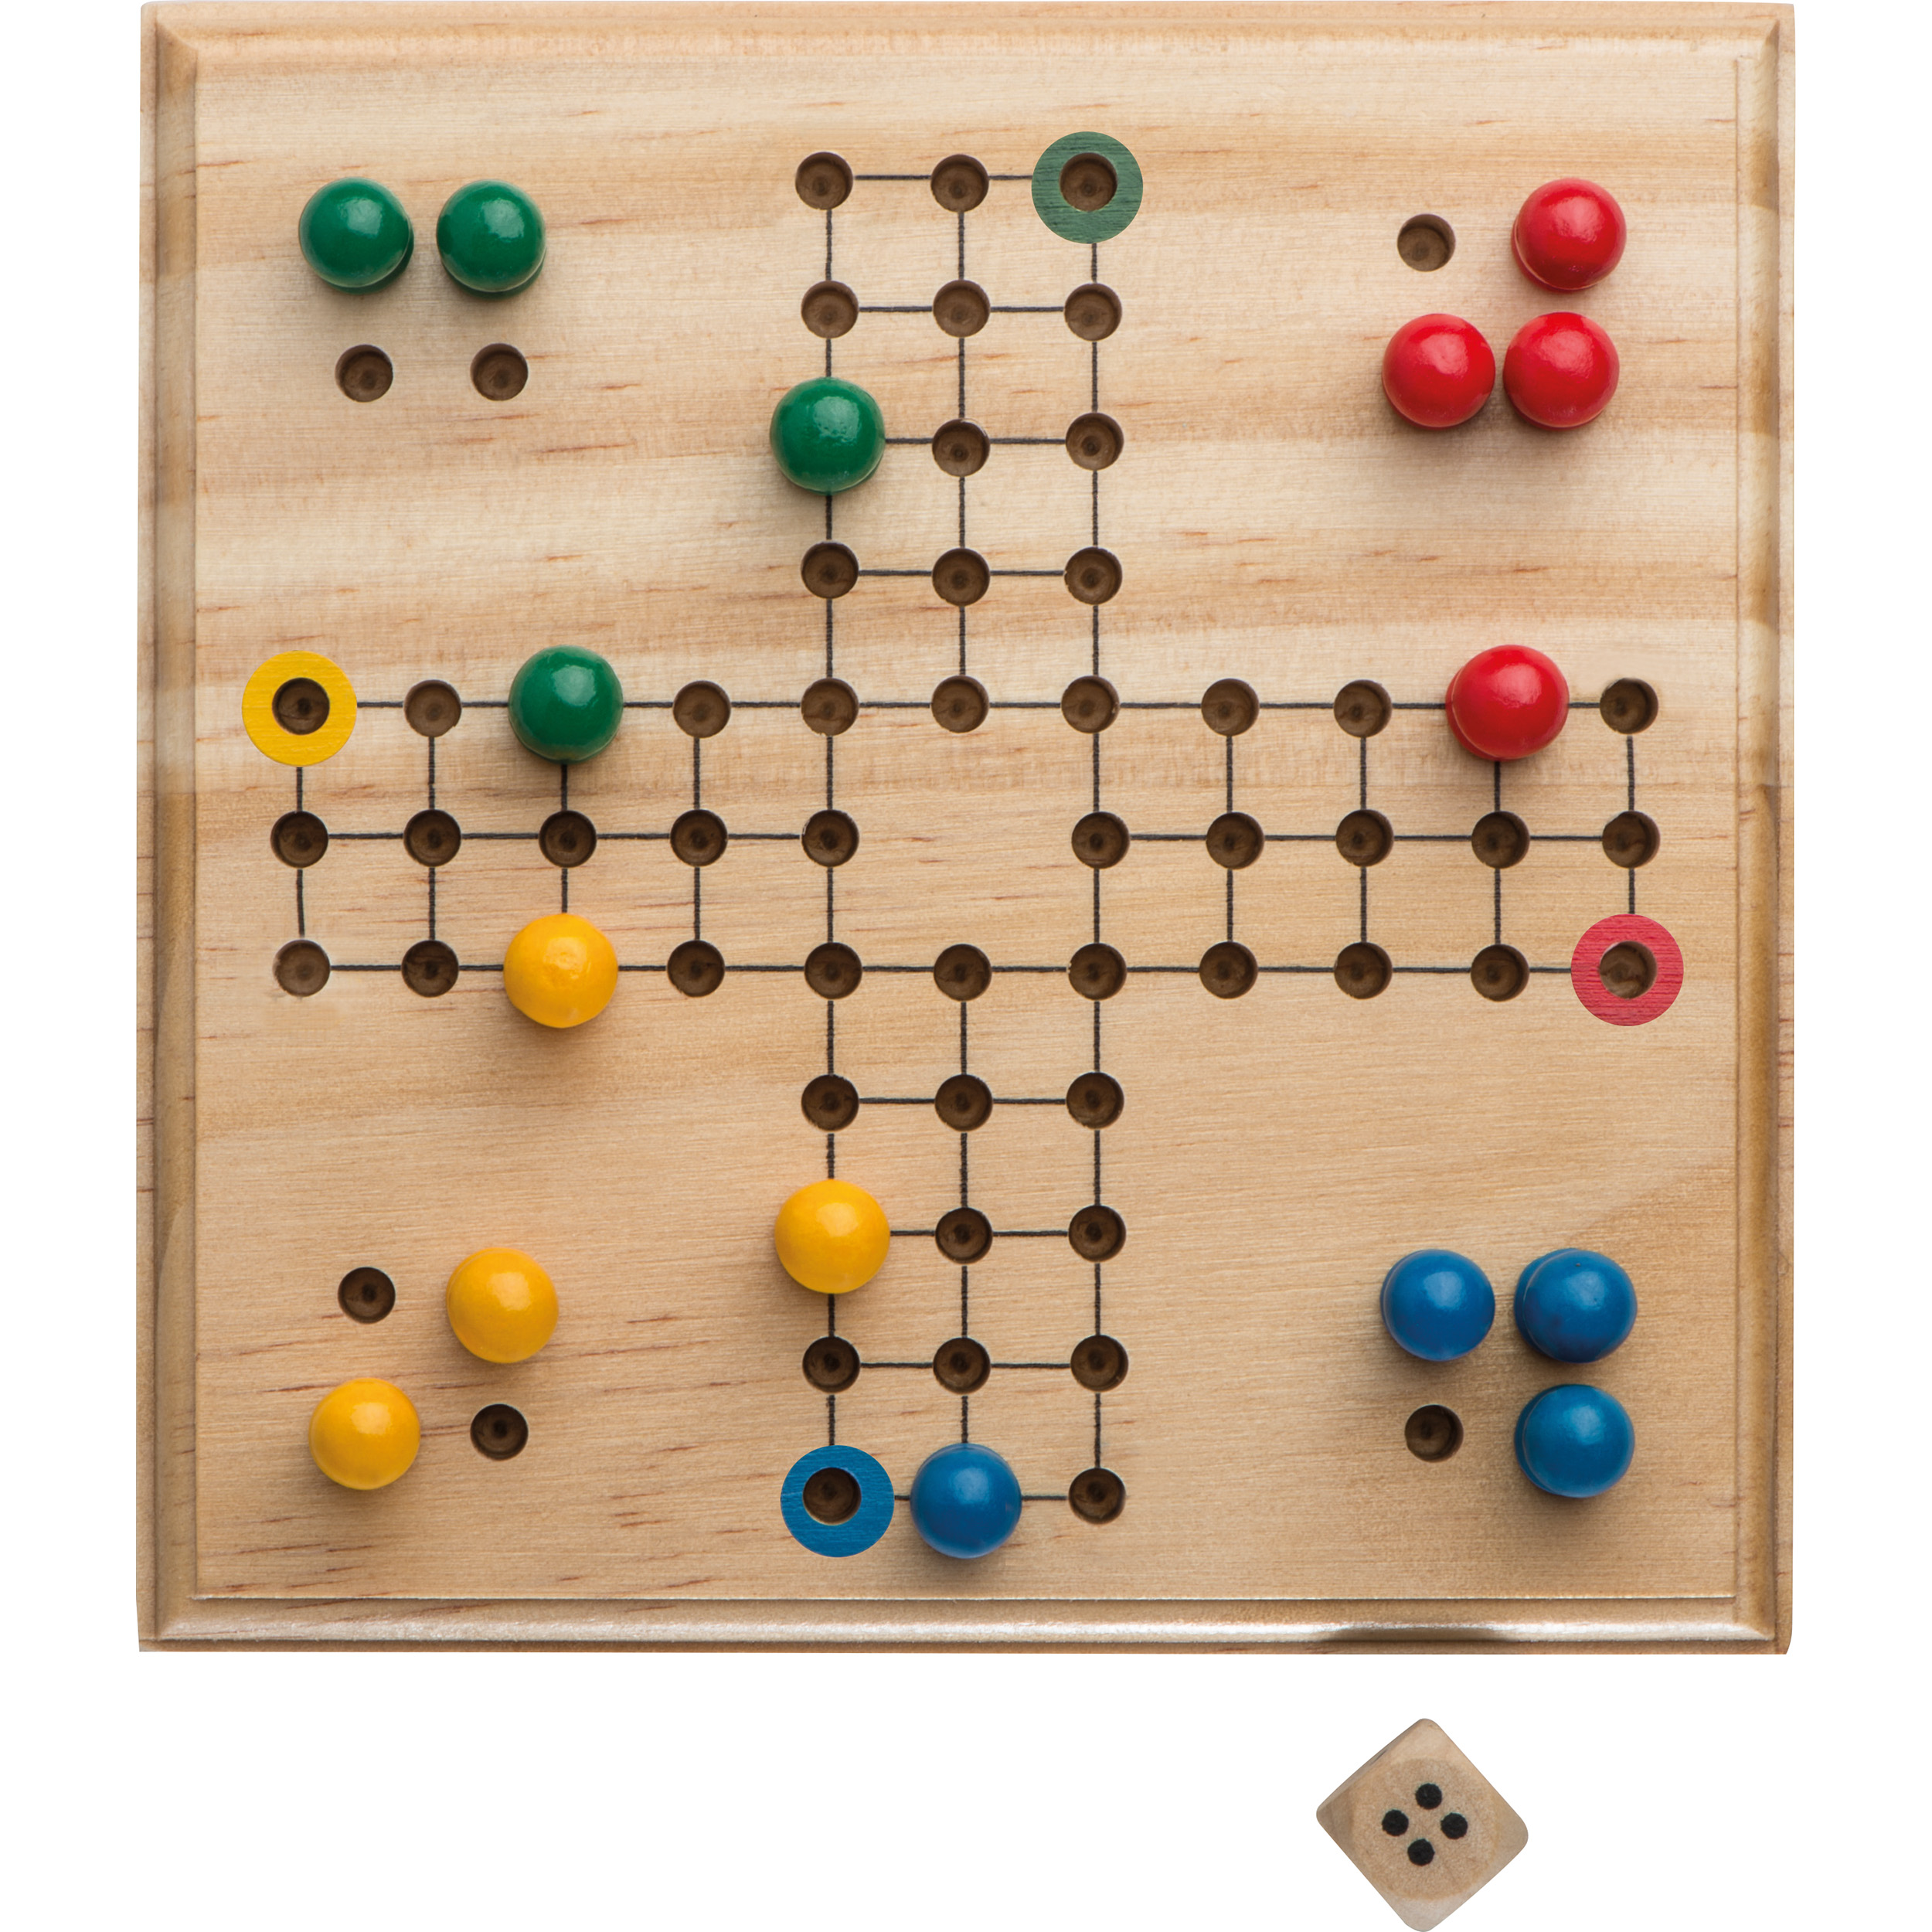 Classic game made of wood